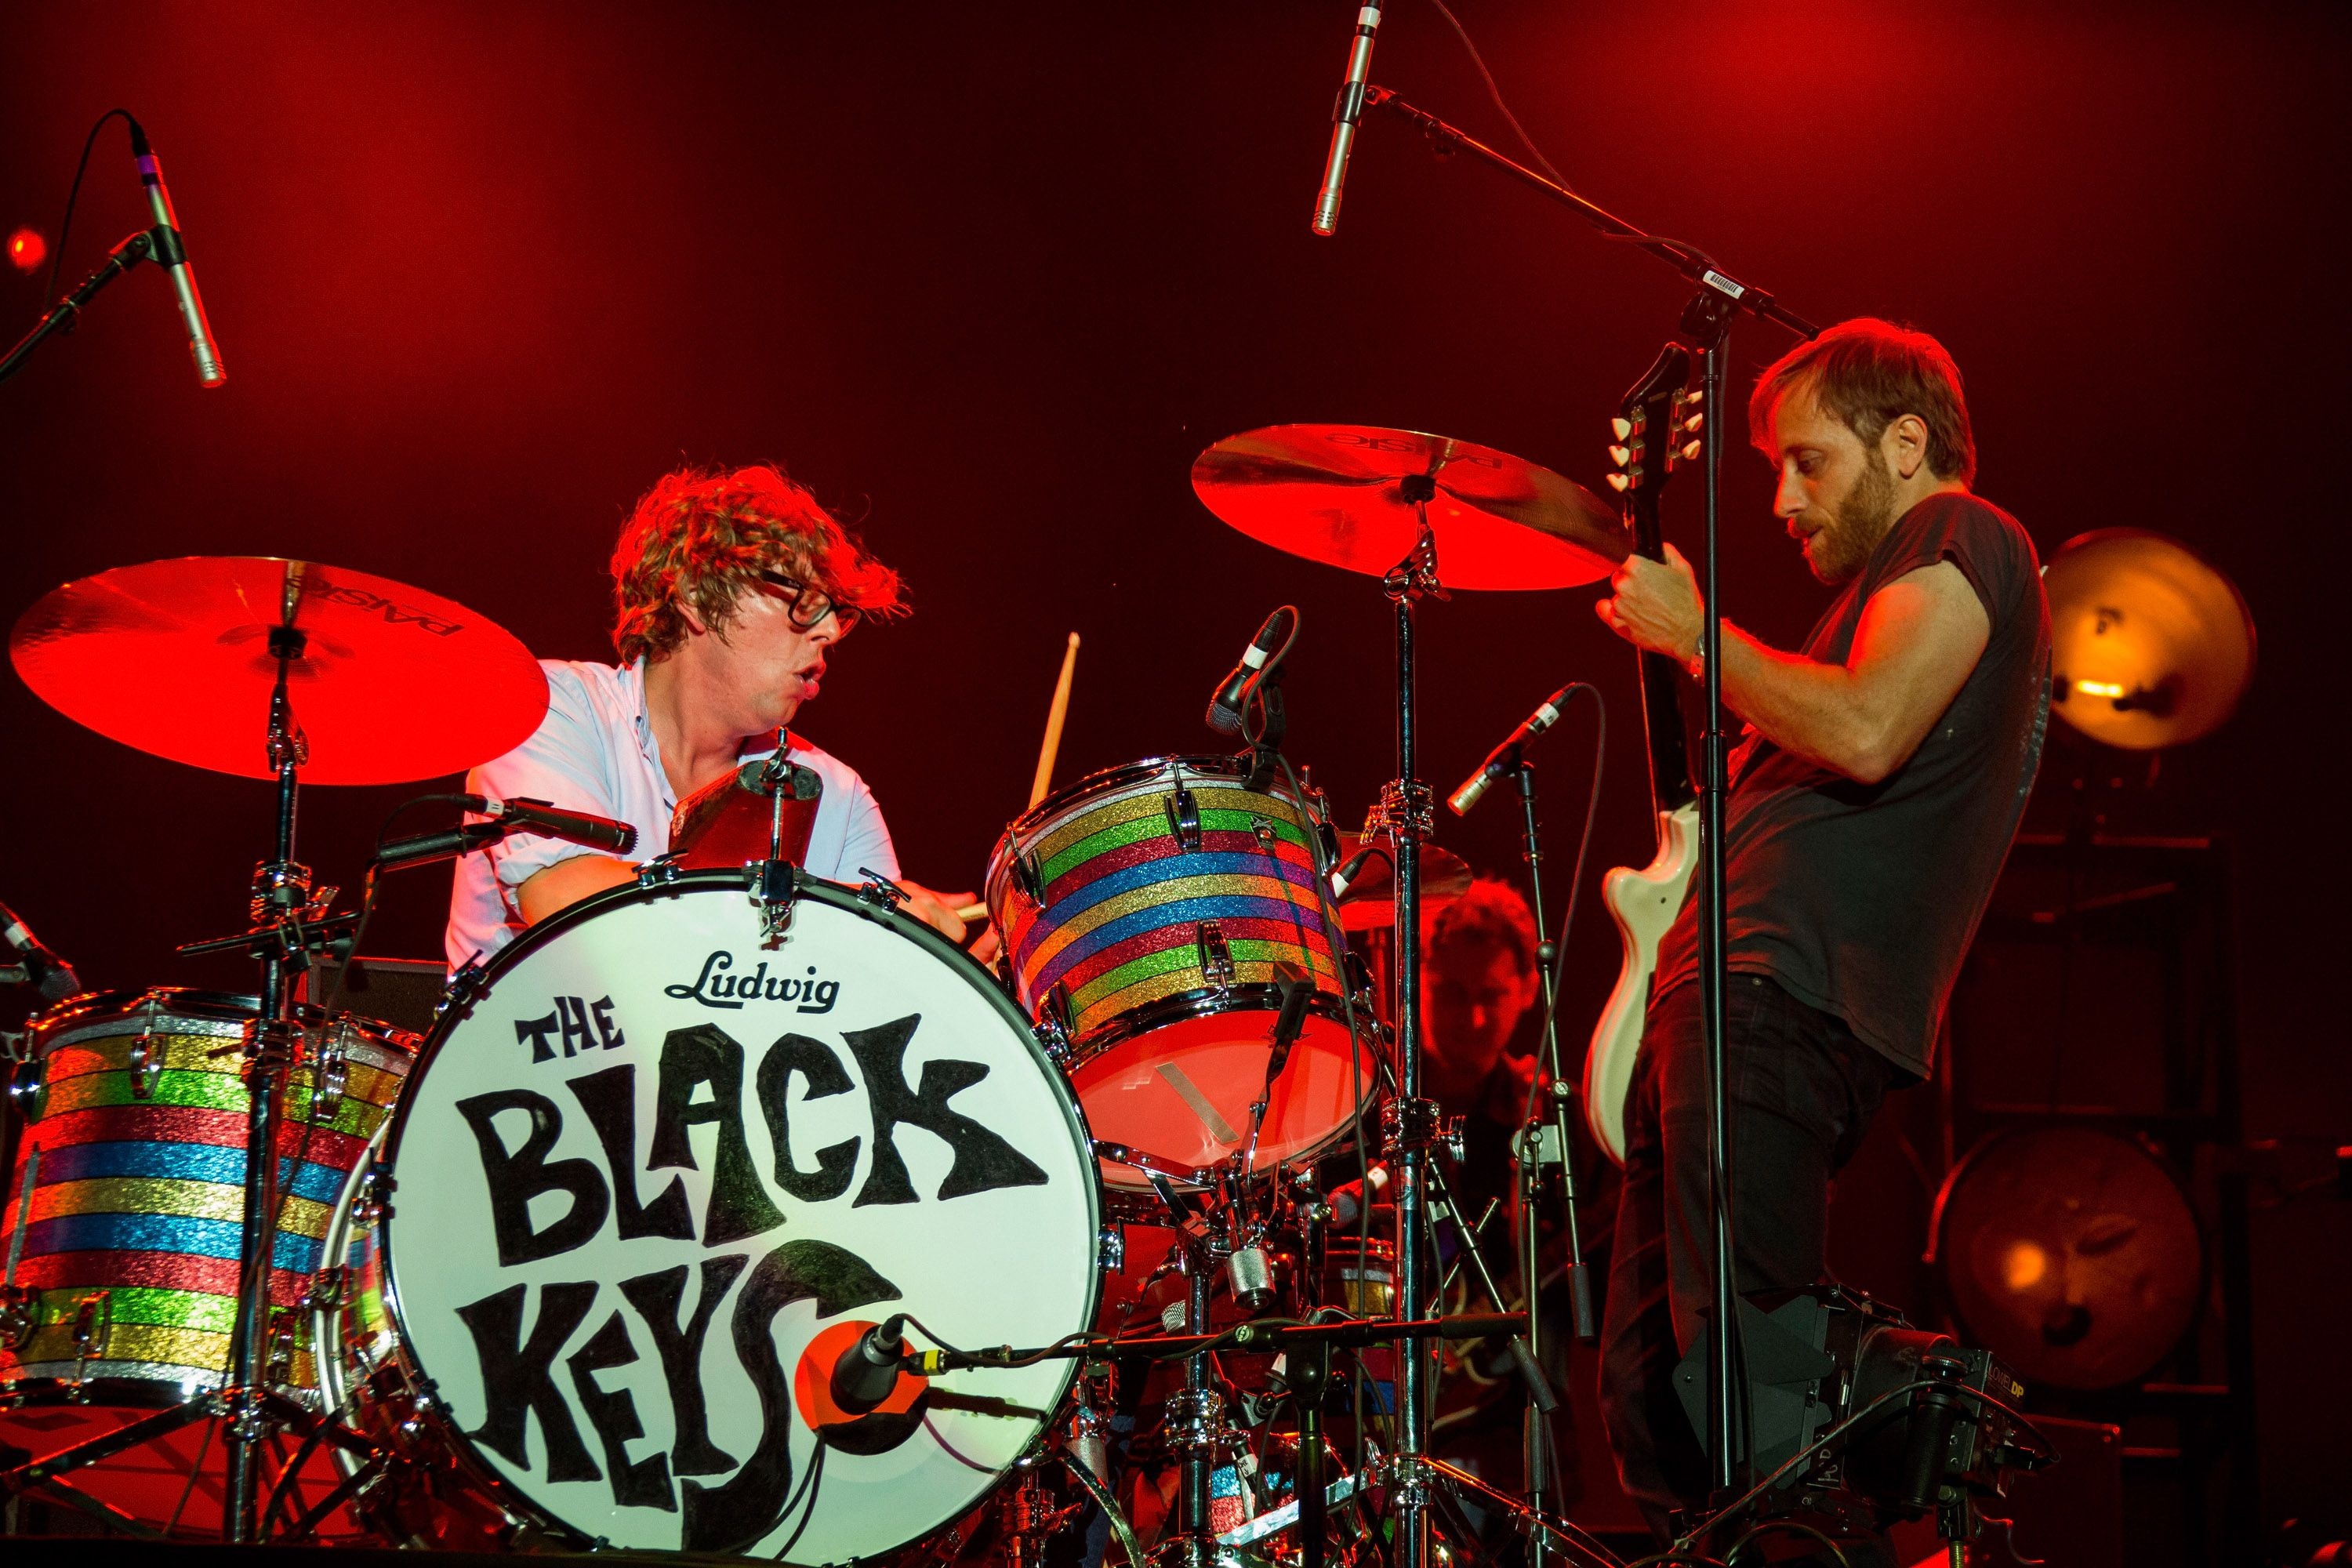 The Black Keys wallpapers, Top free backgrounds, Visual representations of the band's sound, Creative and artistic designs, 3000x2000 HD Desktop